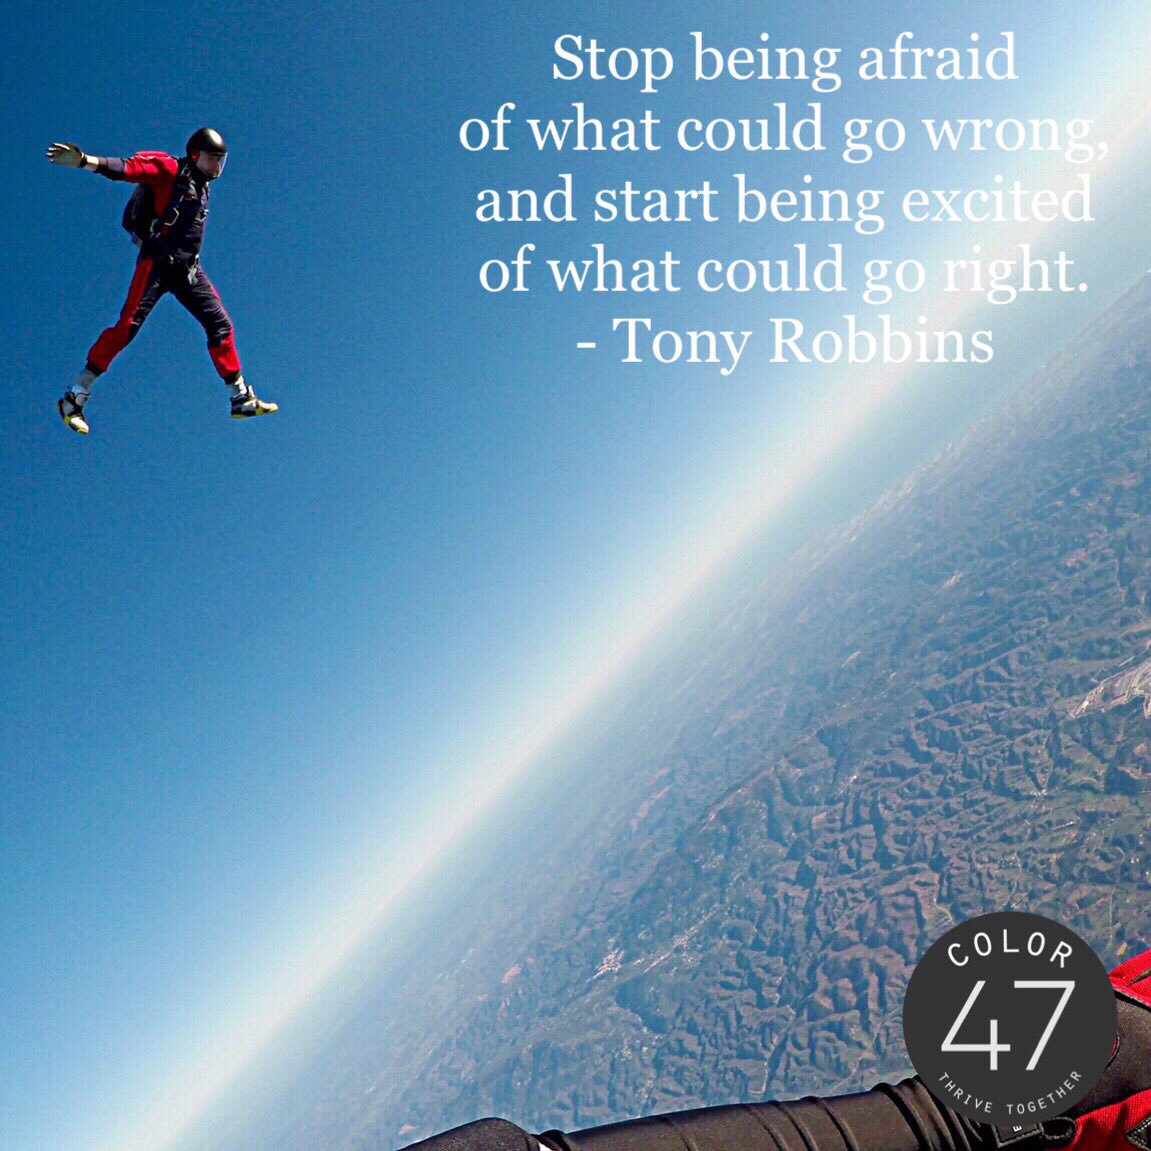 @color47_ Community 
So much of what we want to do or wish we would is hindered by fear of failure or the “what ifs”. What if you do more and worry less?
#color47 
#passion
#purpose 
#love
#community 
#courage 
#domore 
#facefear 
#tonyrobbins 📸: Kamil Pietrzak